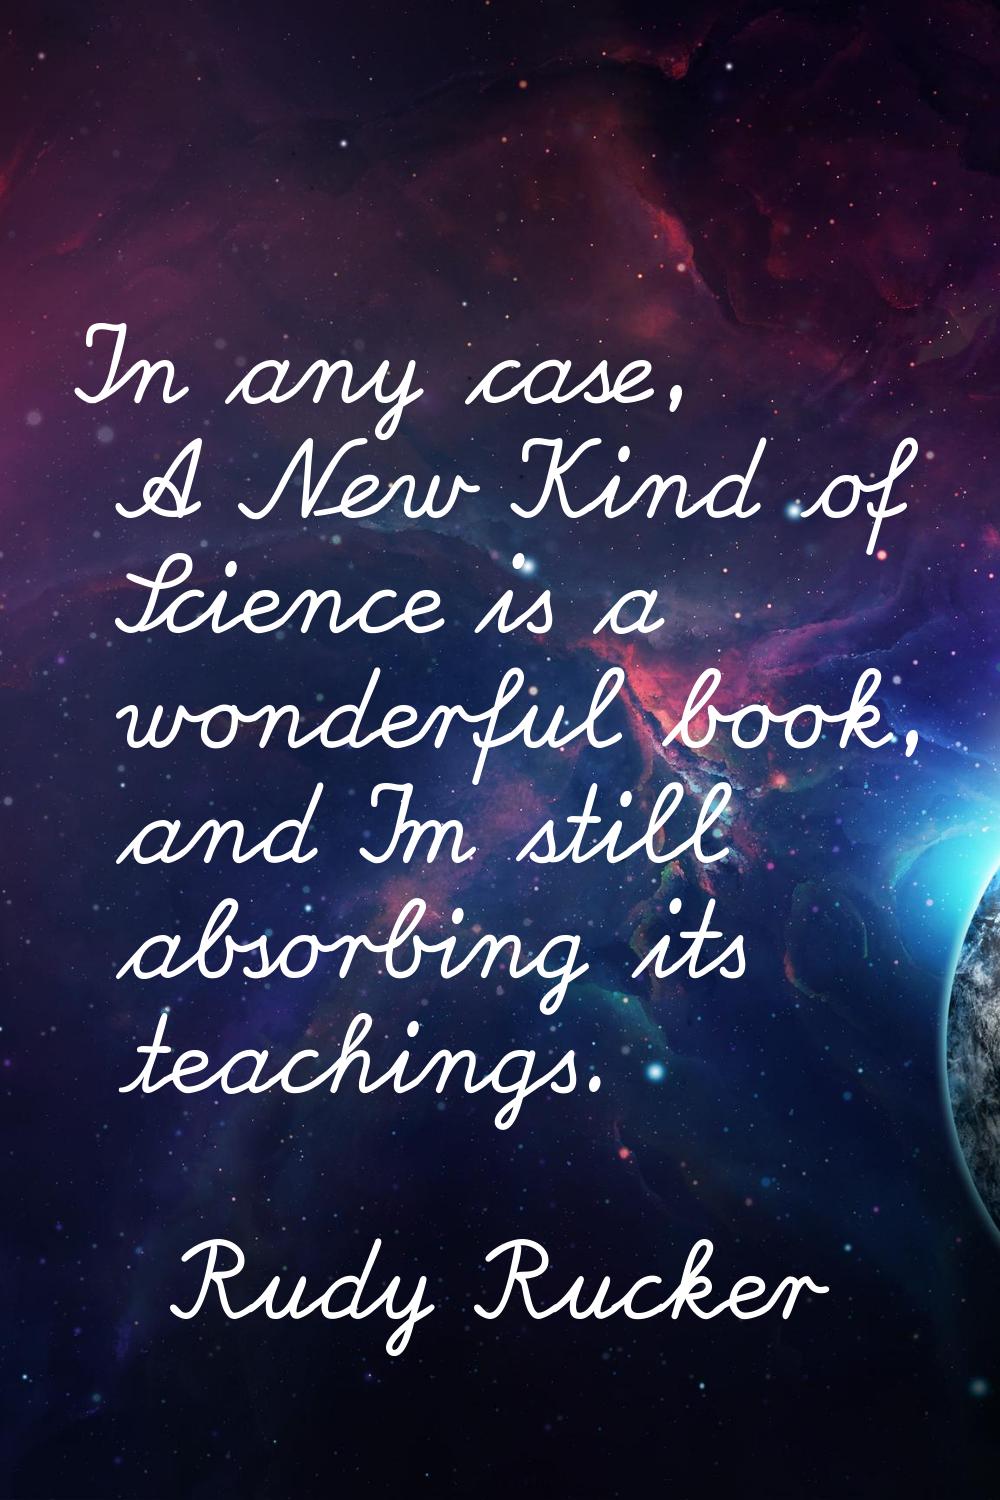 In any case, A New Kind of Science is a wonderful book, and I'm still absorbing its teachings.